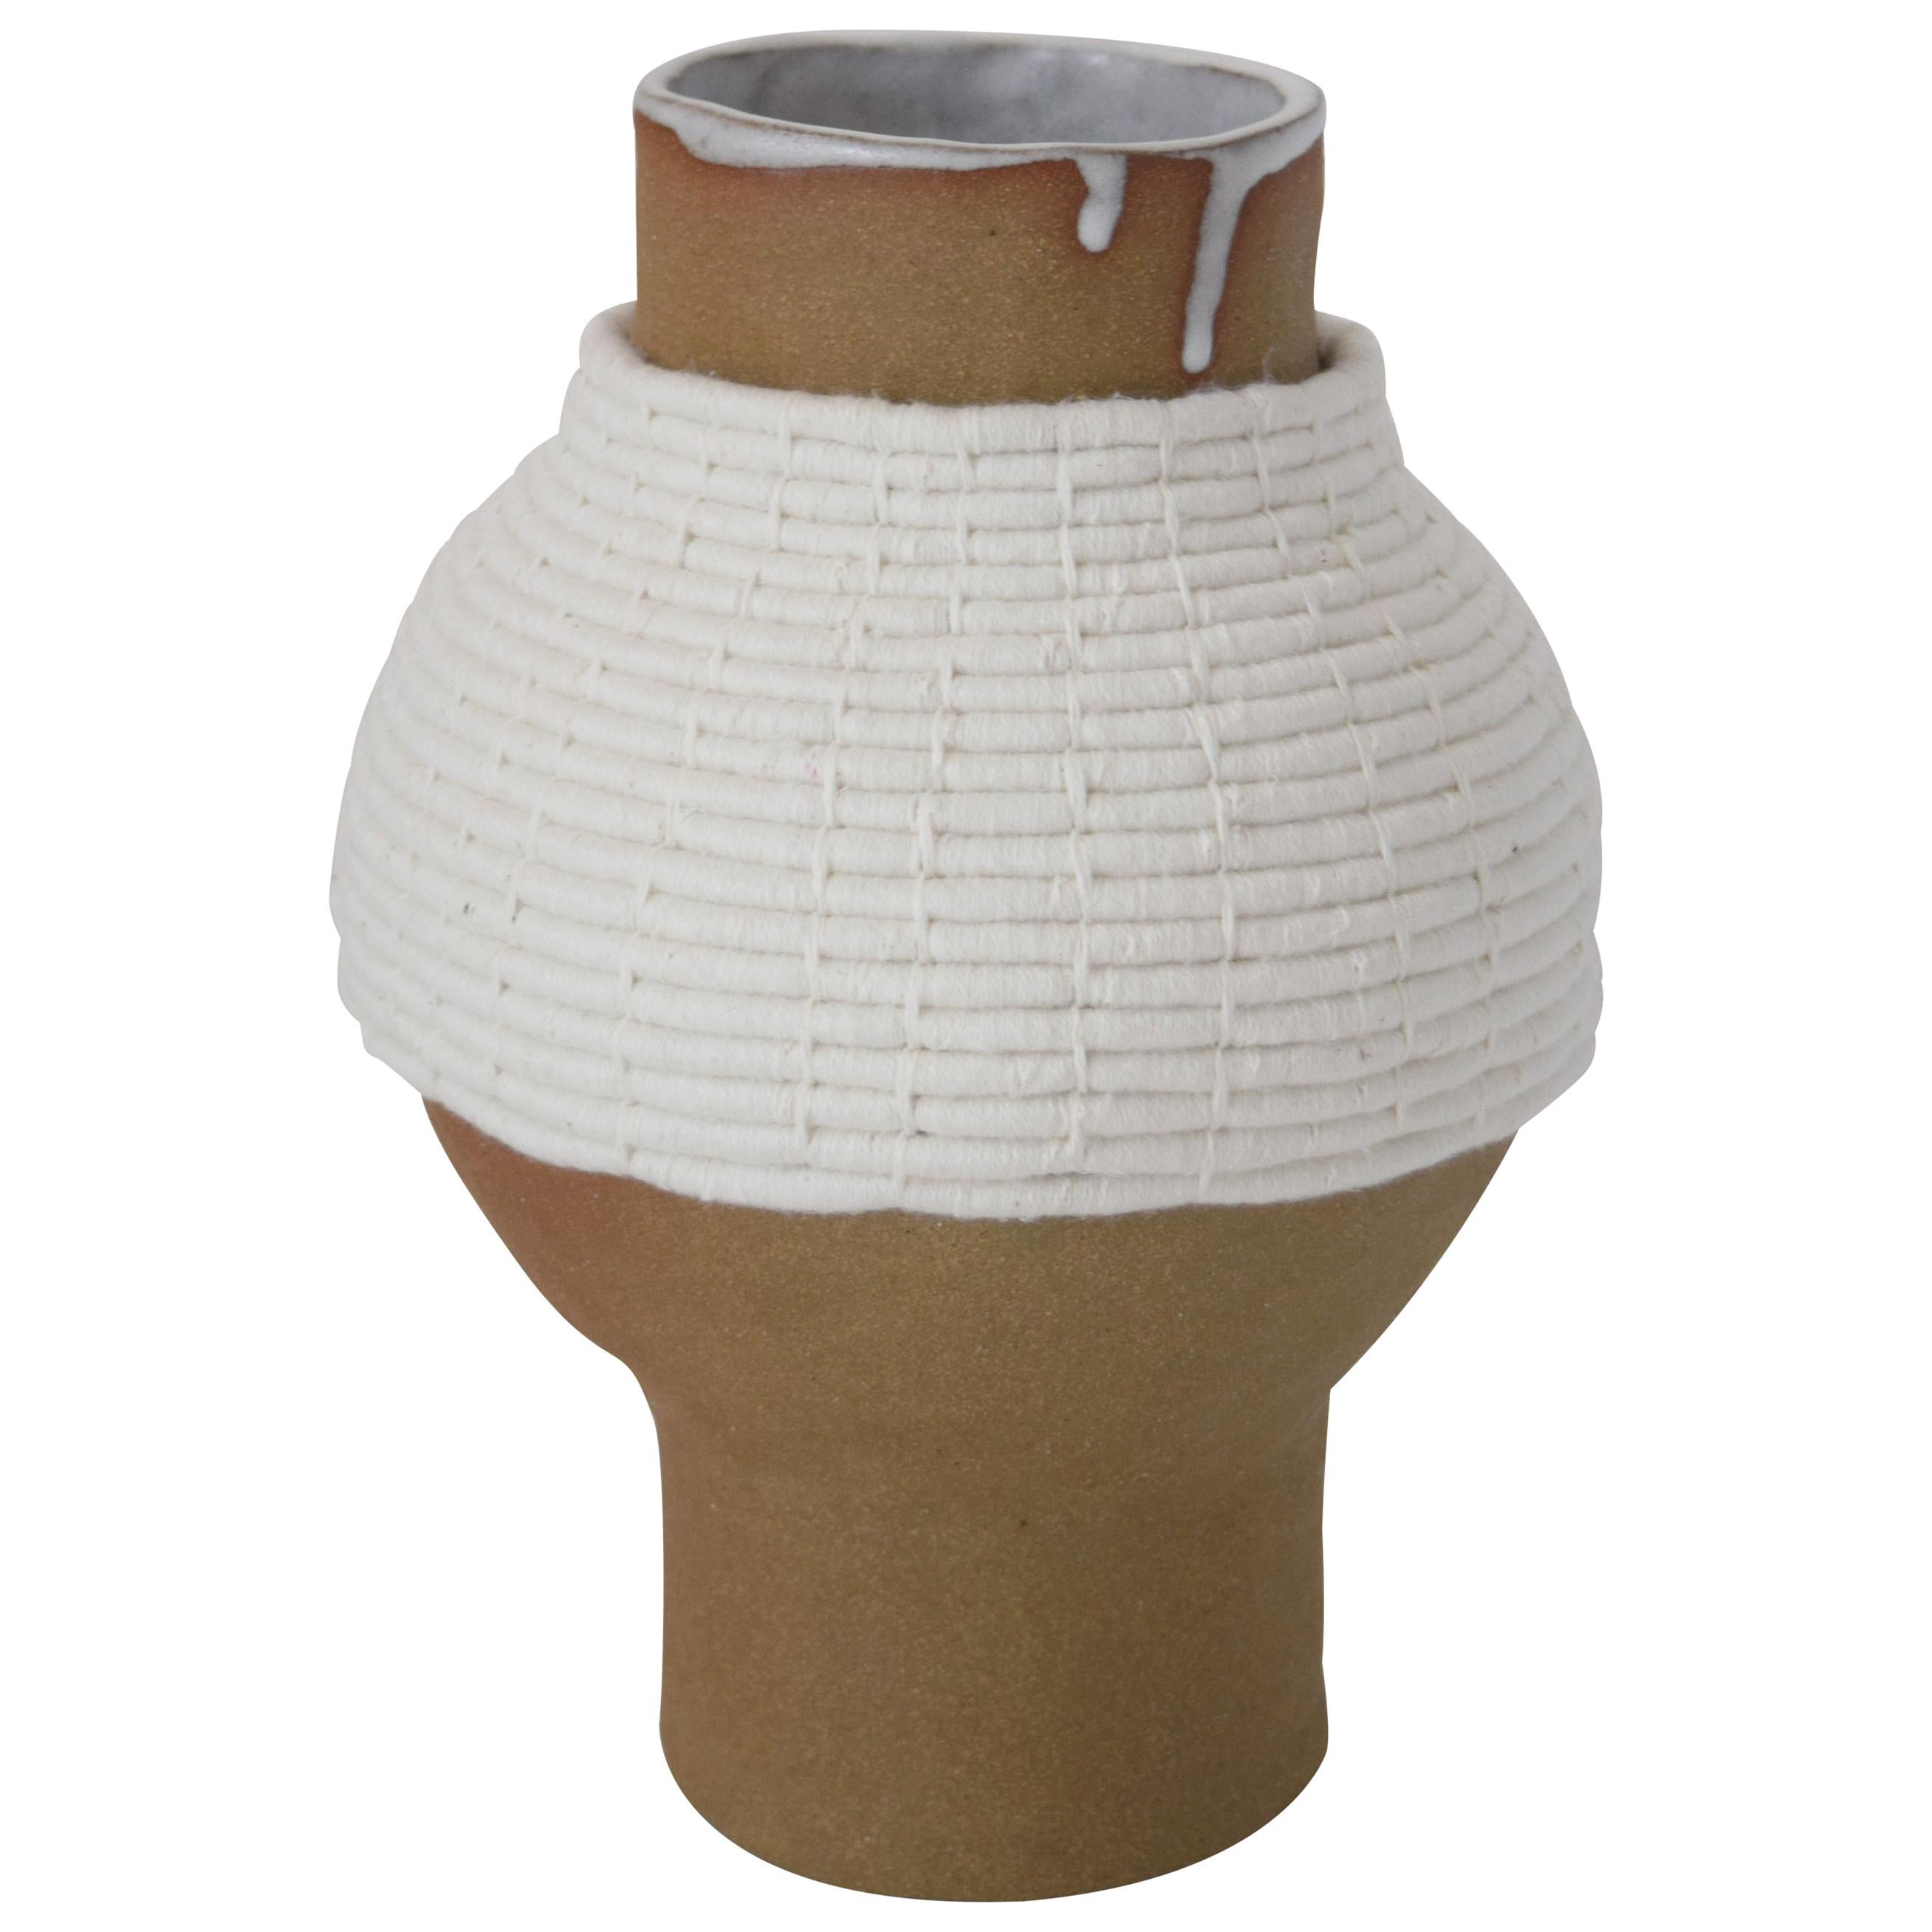 One of a Kind Ceramic and Woven Cotton Vase in Natural/White